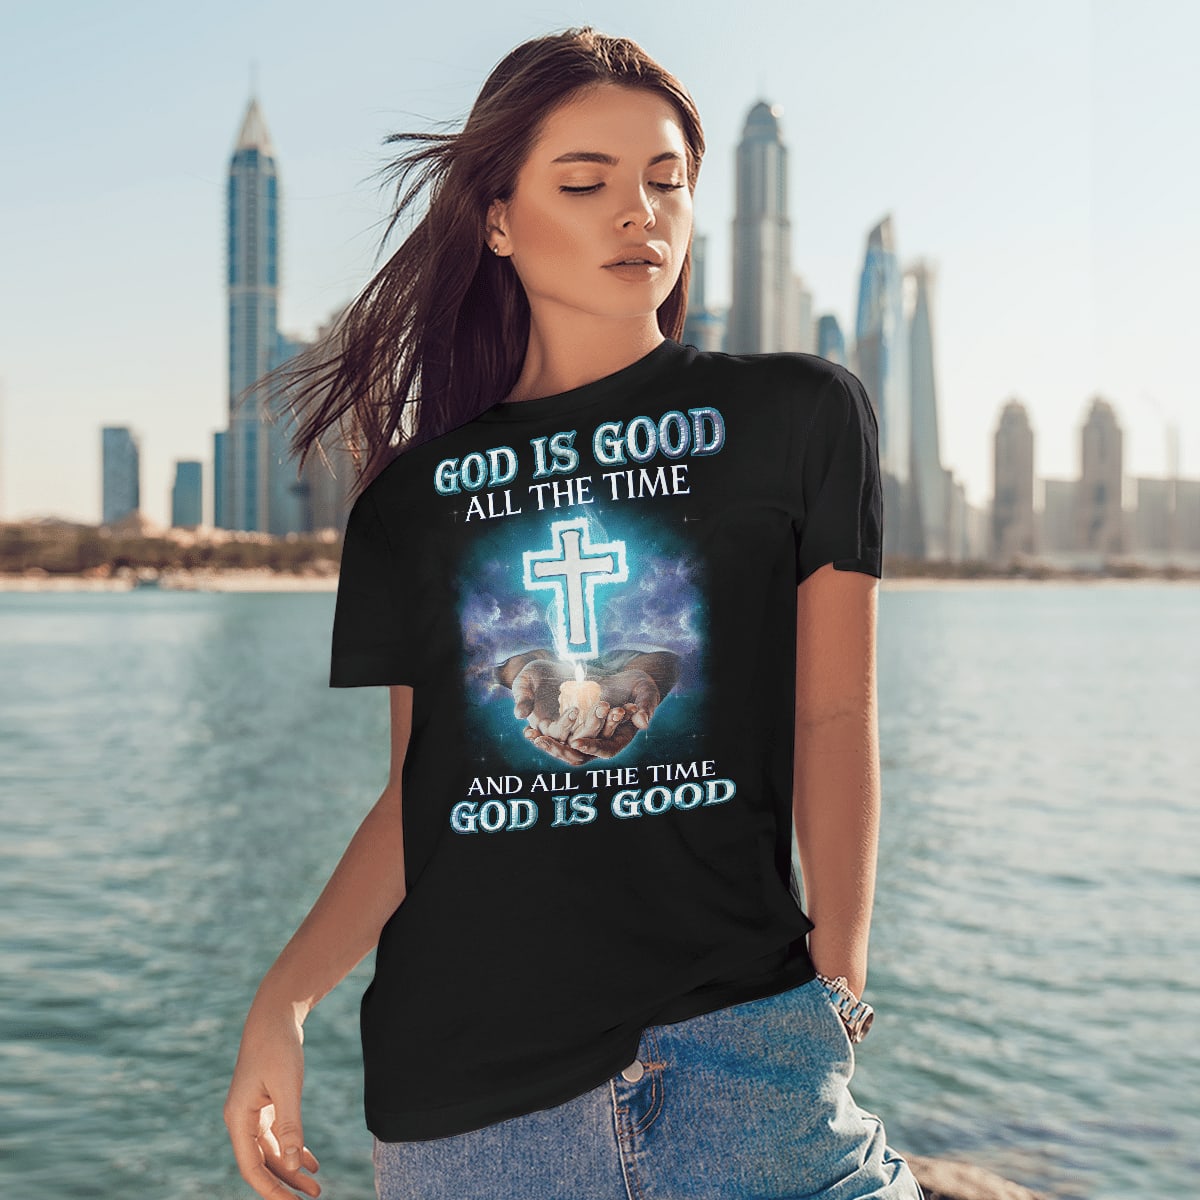 God Is Good All The Time And All The Time God Is Good T-Shirt, Jesus Sweatshirt Hoodie, Faith T-Shirt